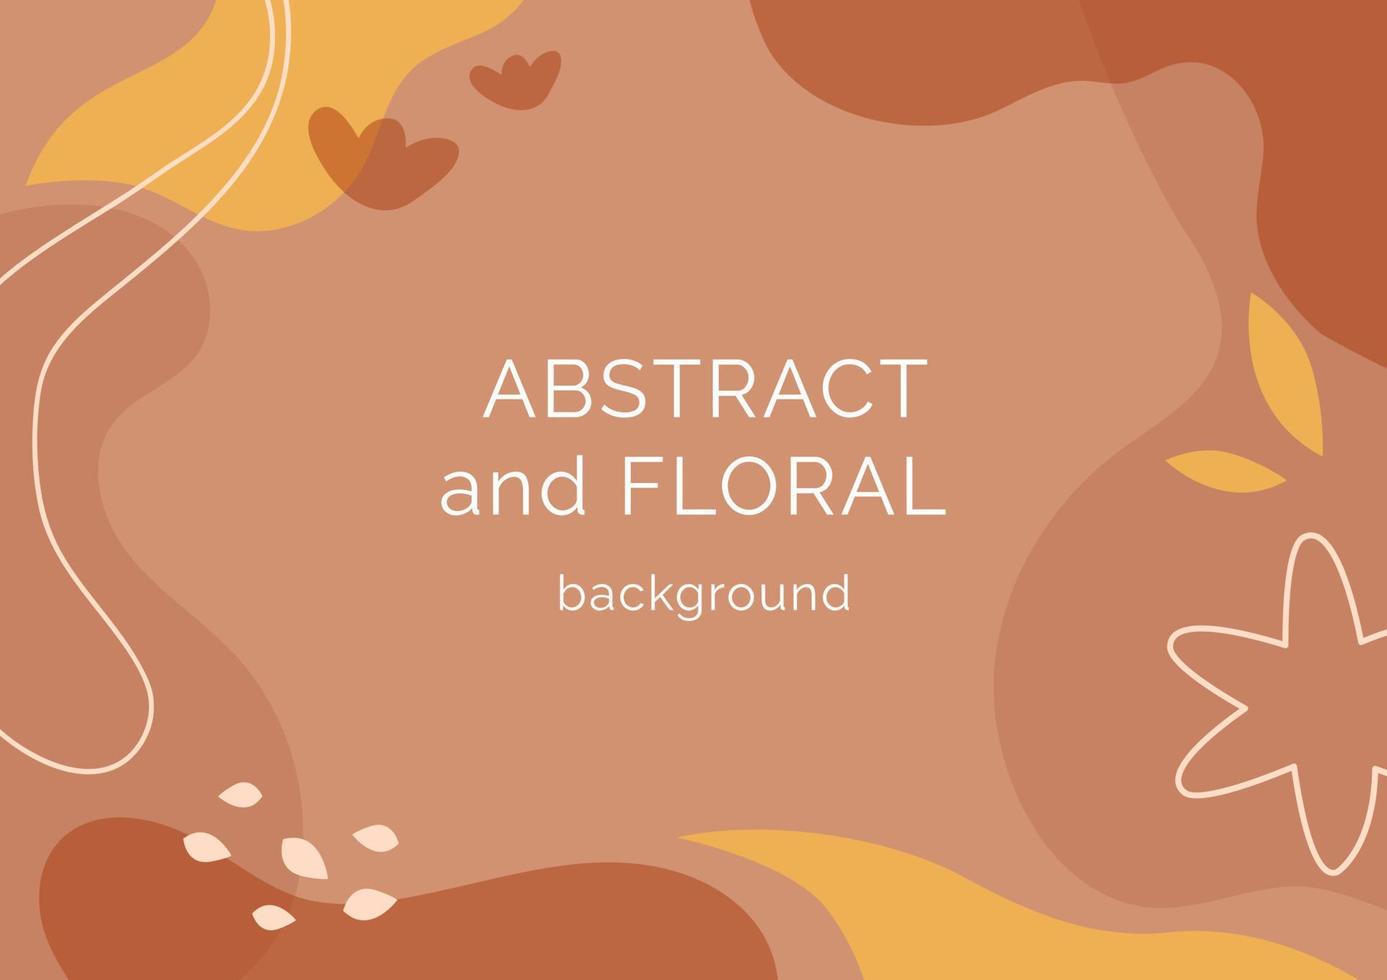 Abstract and floral background template. Fashion collage with organic shapes and line in nude pastel colors. Vector Illustration